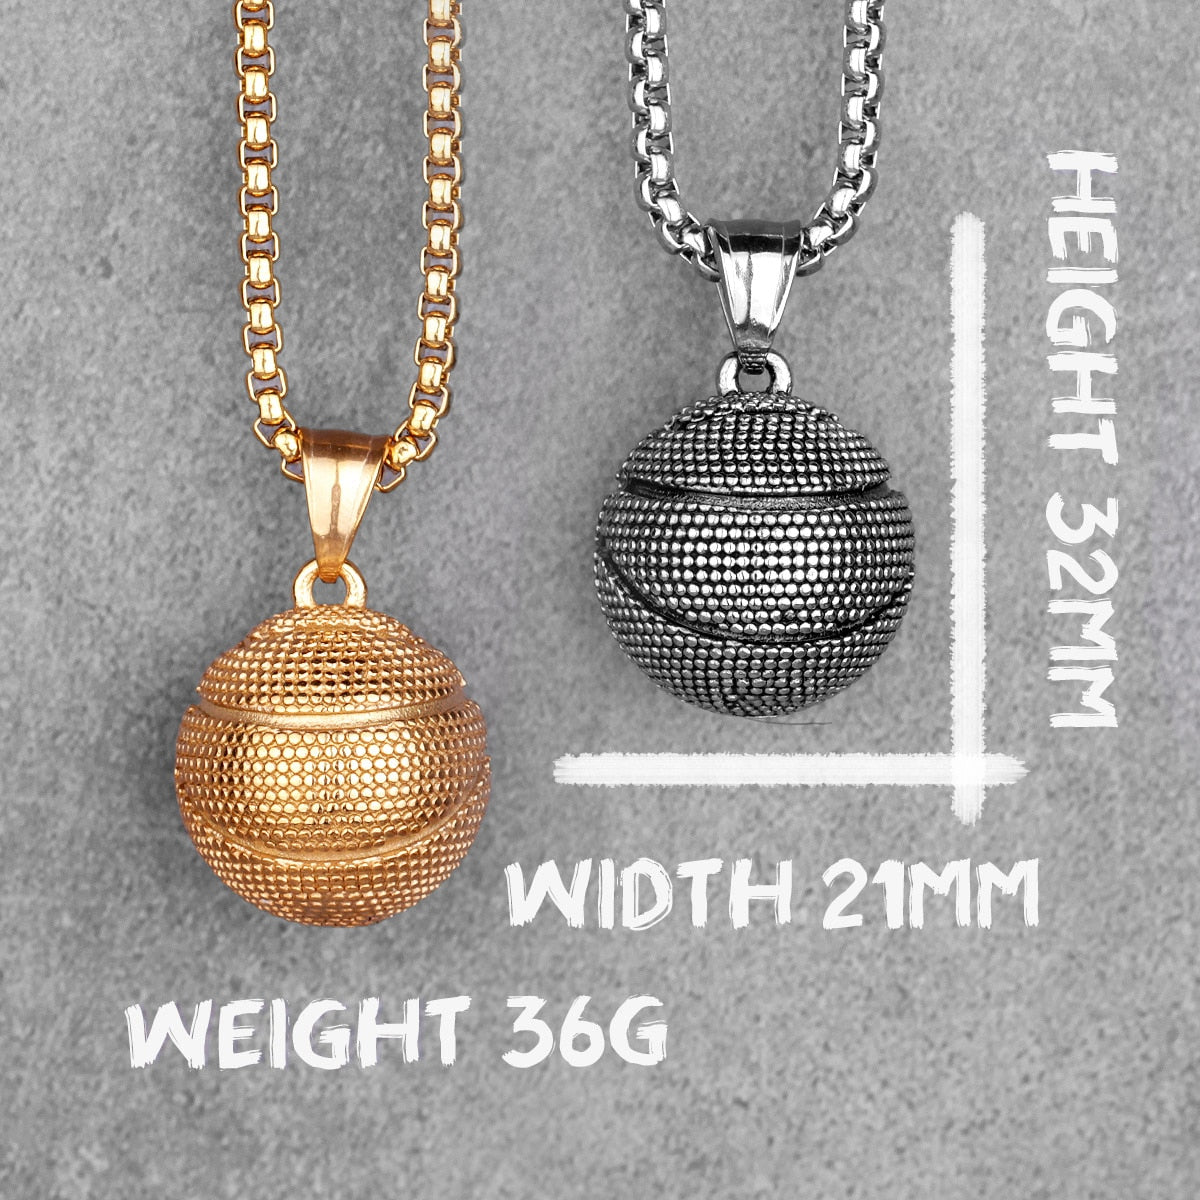 Basketball Mens Long Necklaces Pendants Chain Hip Hop Punk for Boy Male Stainless Steel Jewelry Creativity Gift Wholesale